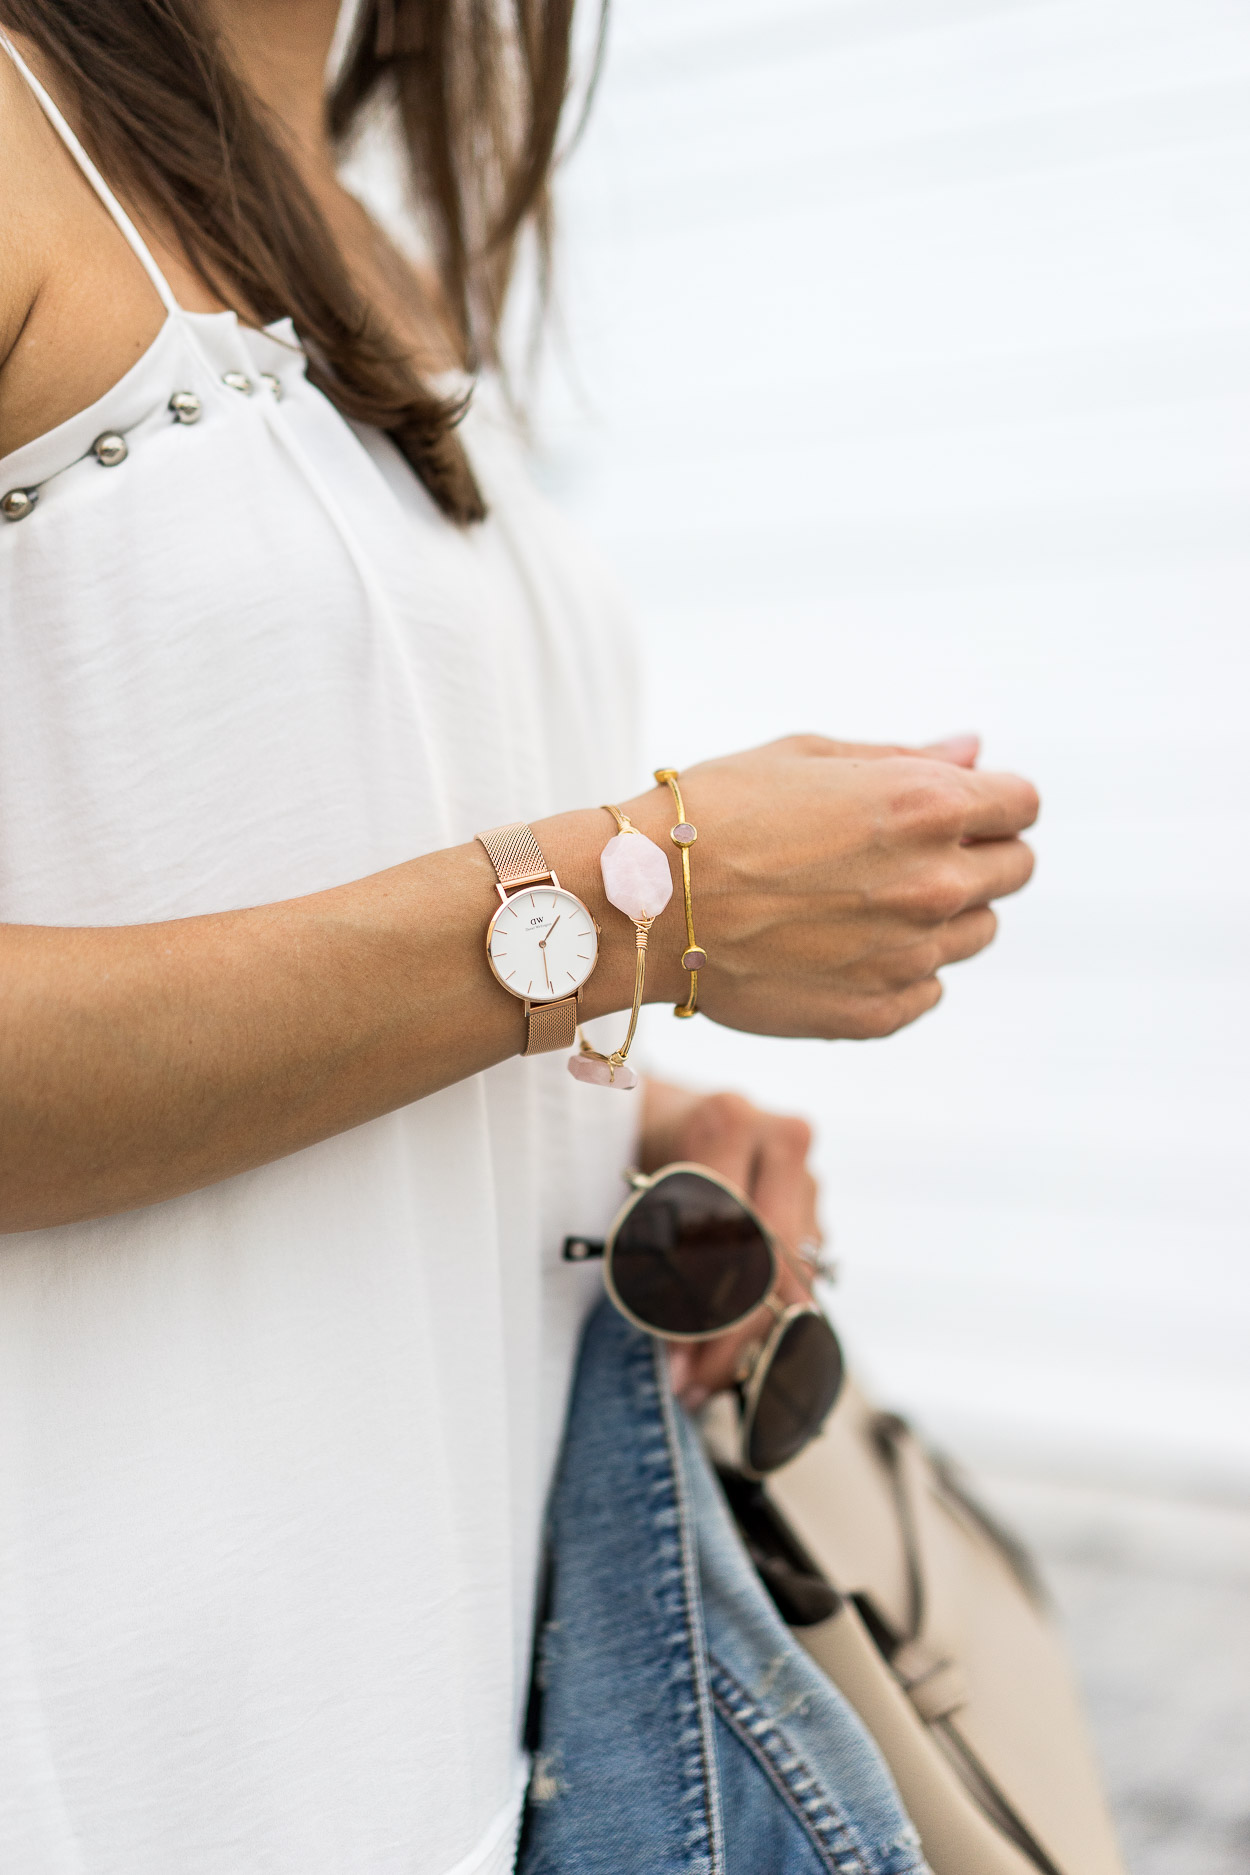 Memorial Day sales and Memorial Day outfit inspo by AGlamLifestyle wearing her Daniel Wellington Petite Classic watch in rose gold